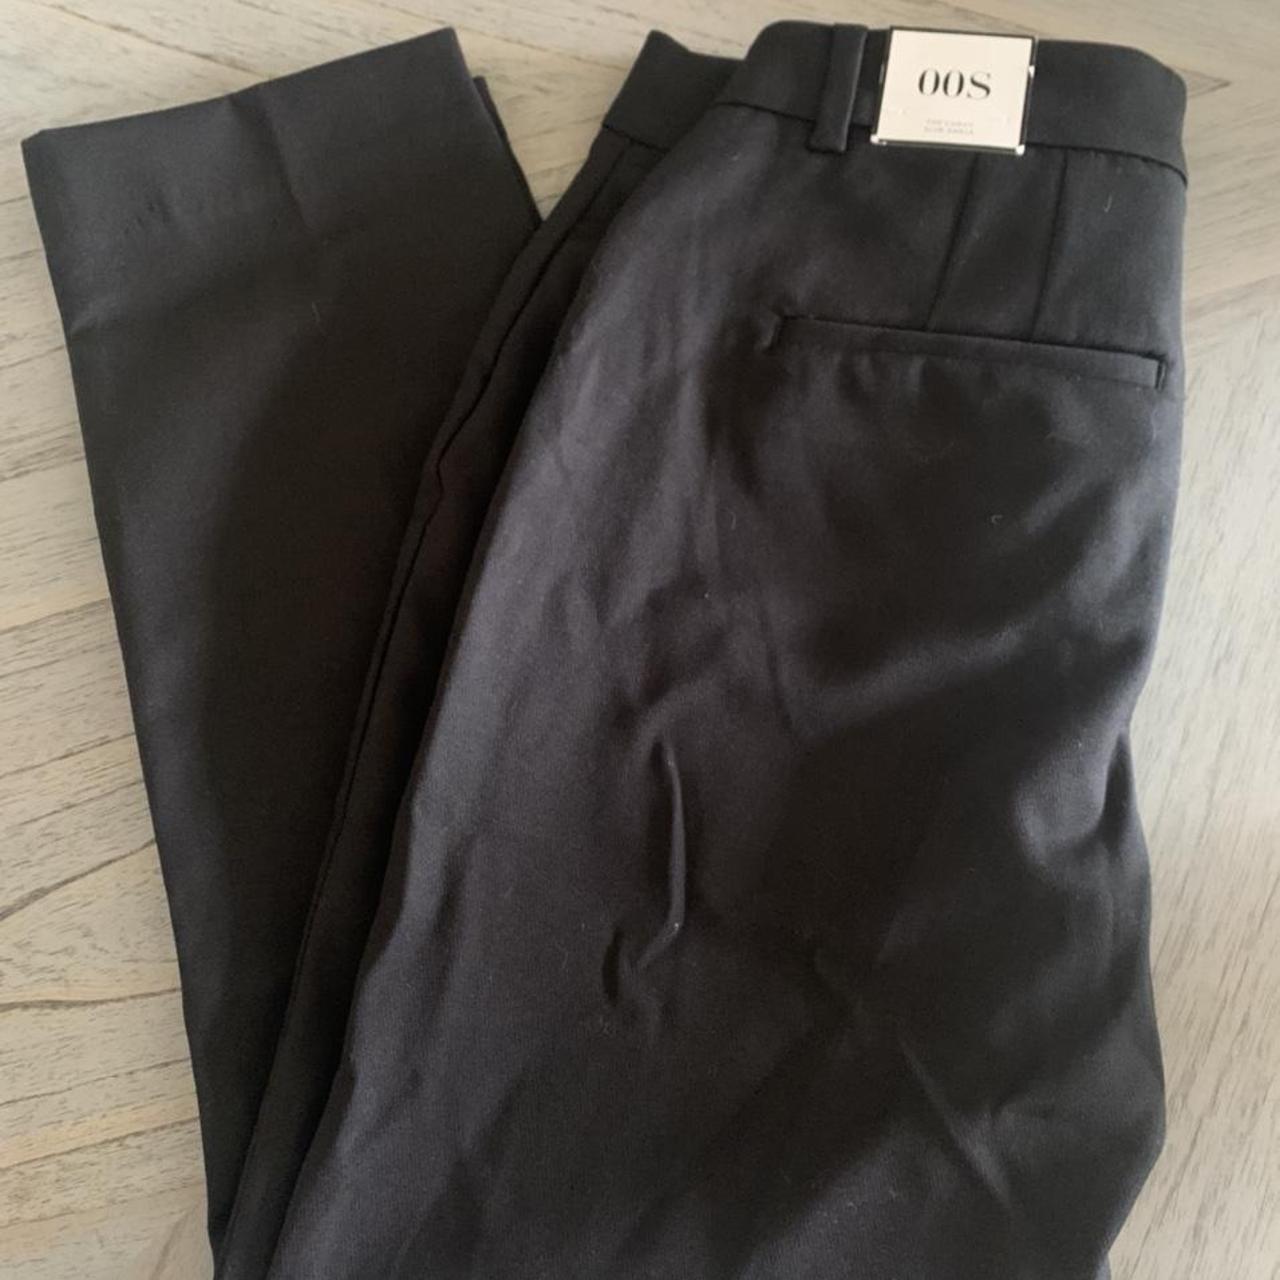 WHBM 00S curvy slim ankle trousers only ever tried... - Depop